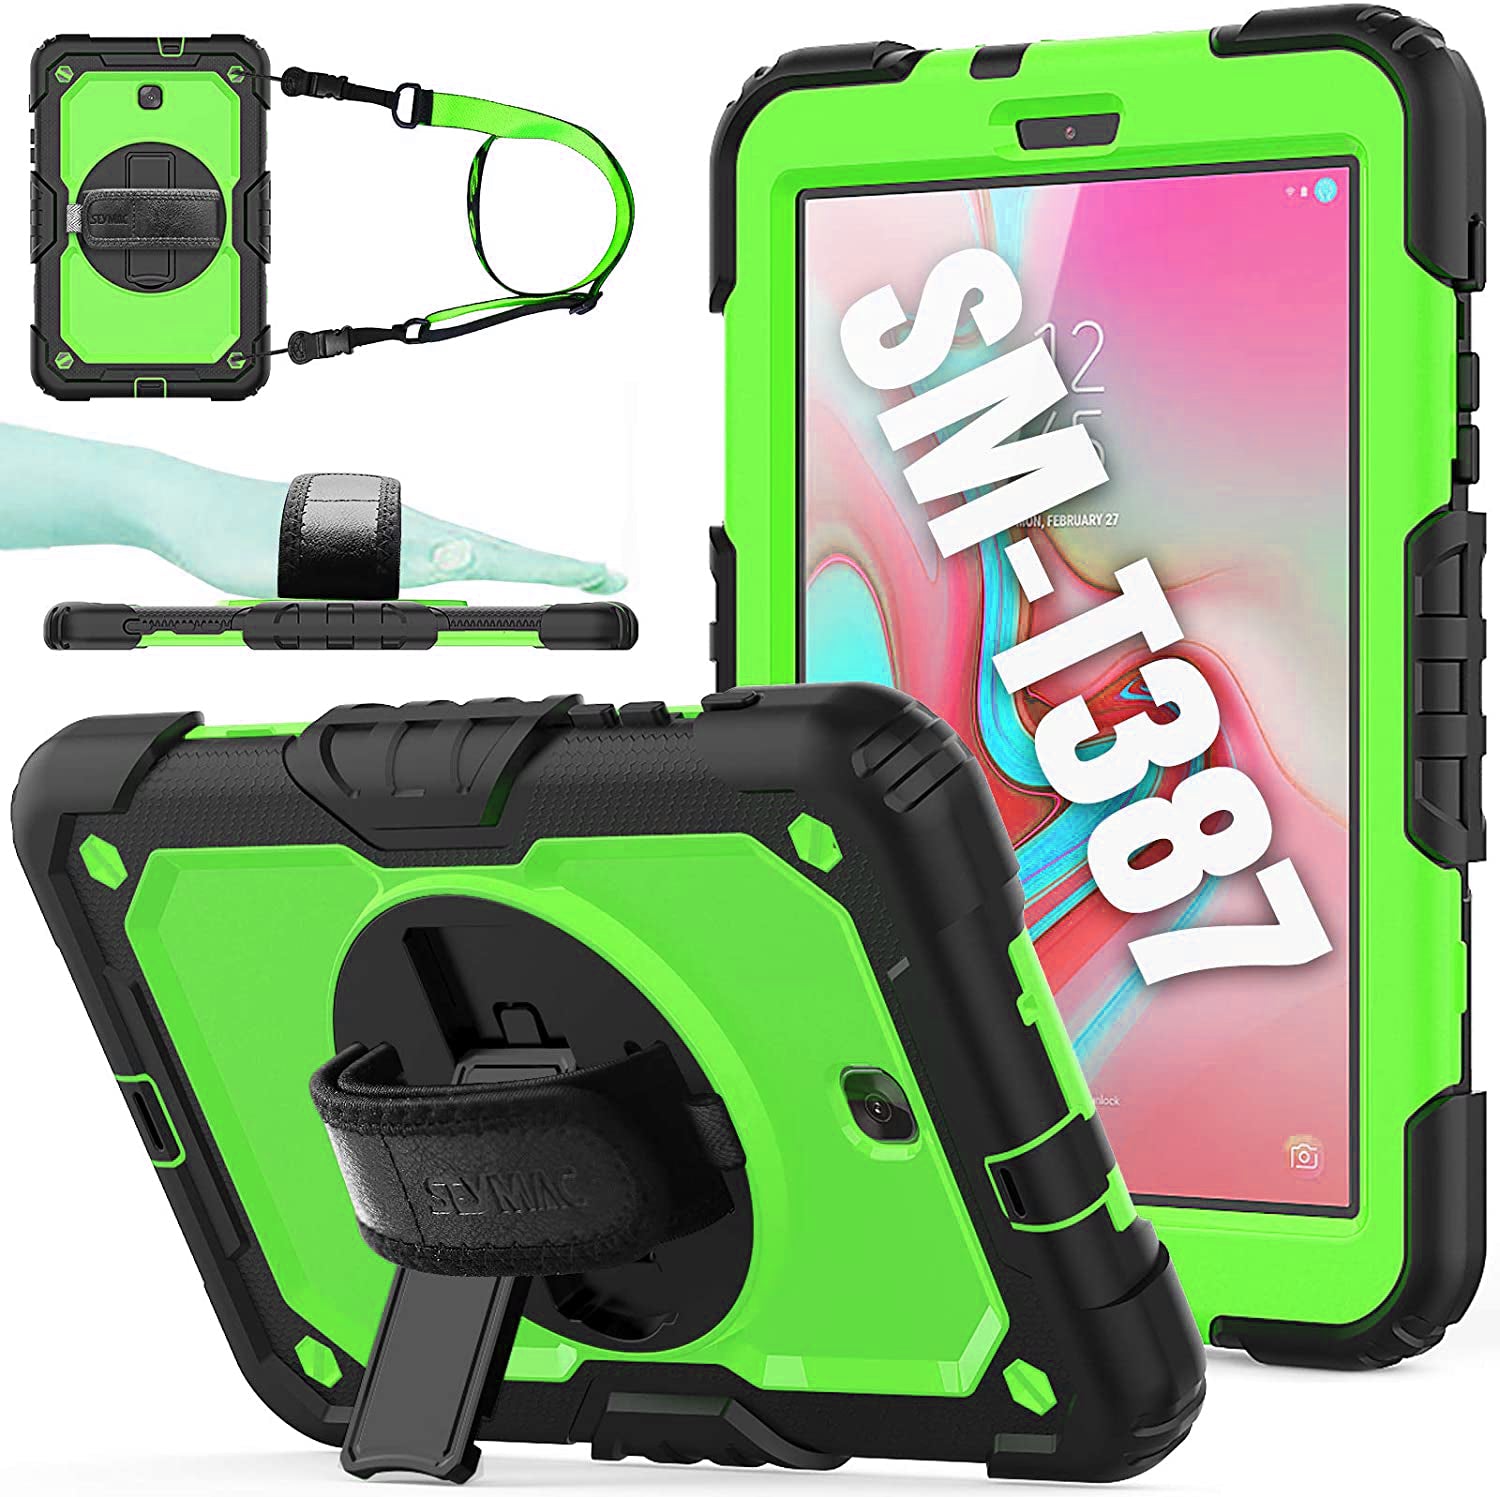 SEYMAC stock Case for SM-T387, 2018 Version of Galaxy Tab A 8.0, (Not fit Other Galaxy Tab A 8.0) - GREEN - e4cents